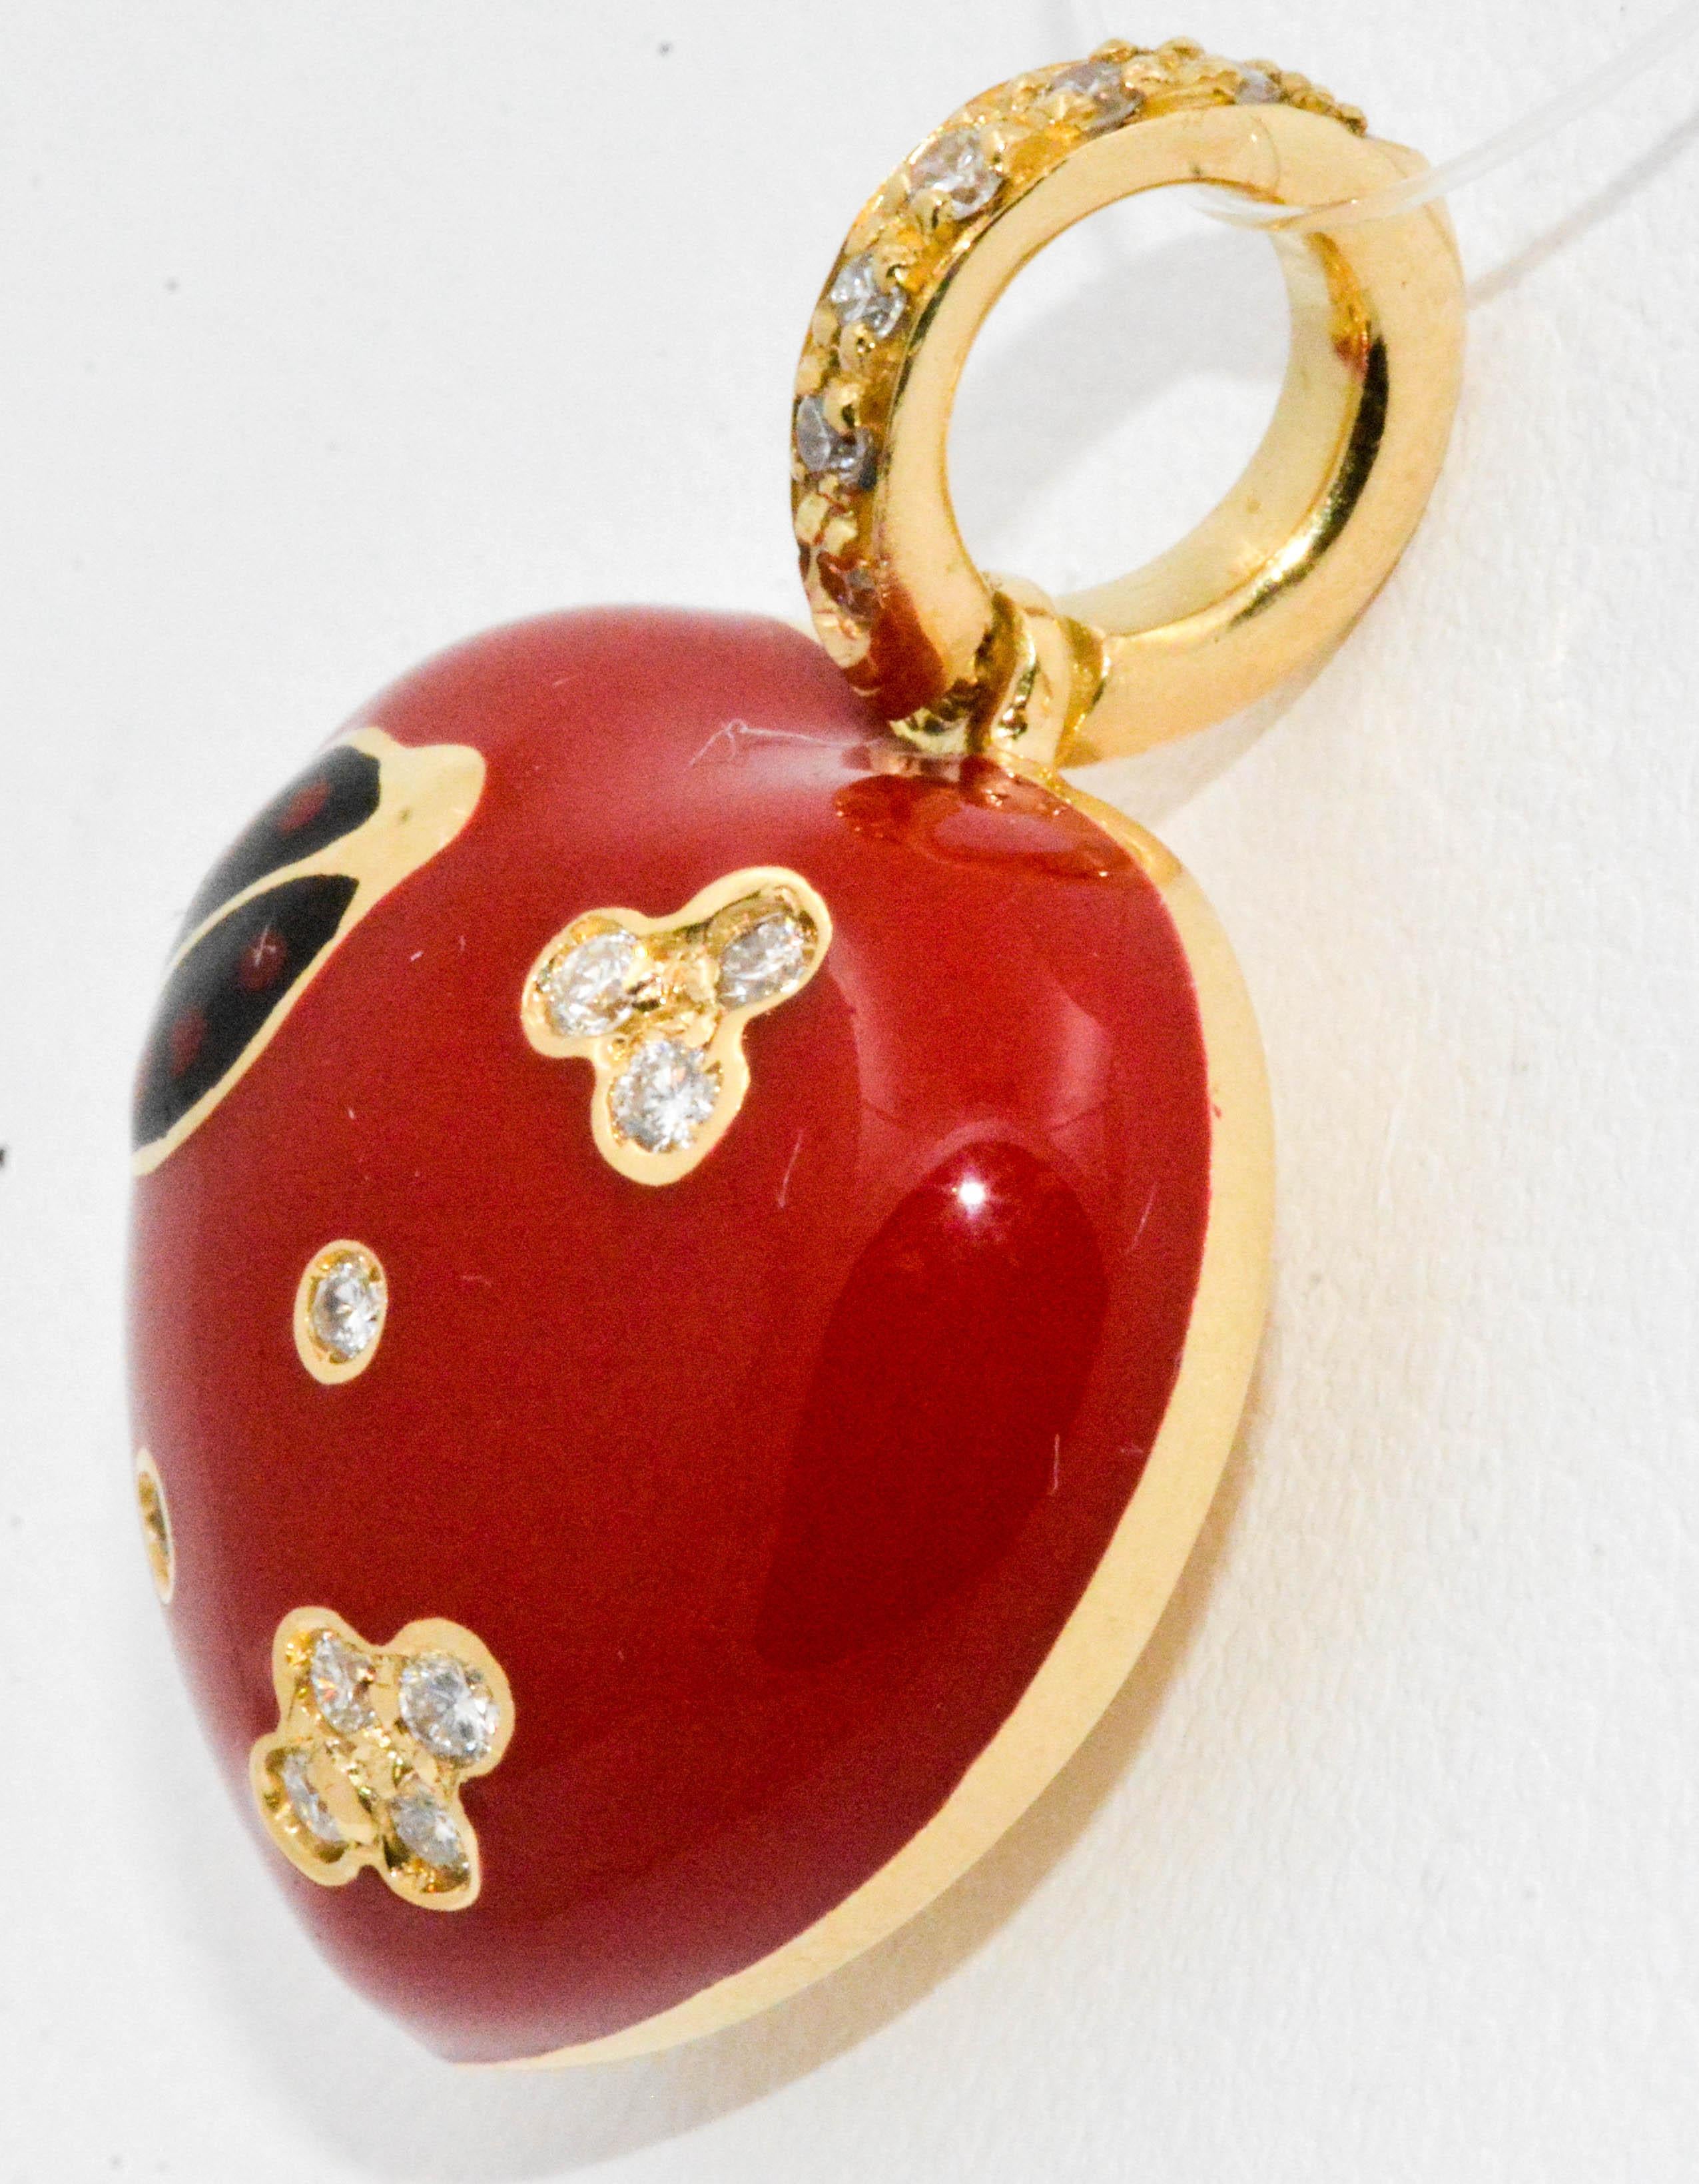 Hearts delight! This delightful Aaron Basha red enamel heart charm has diamonds and a ladybug motif. 14 round brilliant cut diamonds ( .14 ctw G color, VS internal clarity) are pleasantly set on a graceful 14 karat yellow gold bail and randomly